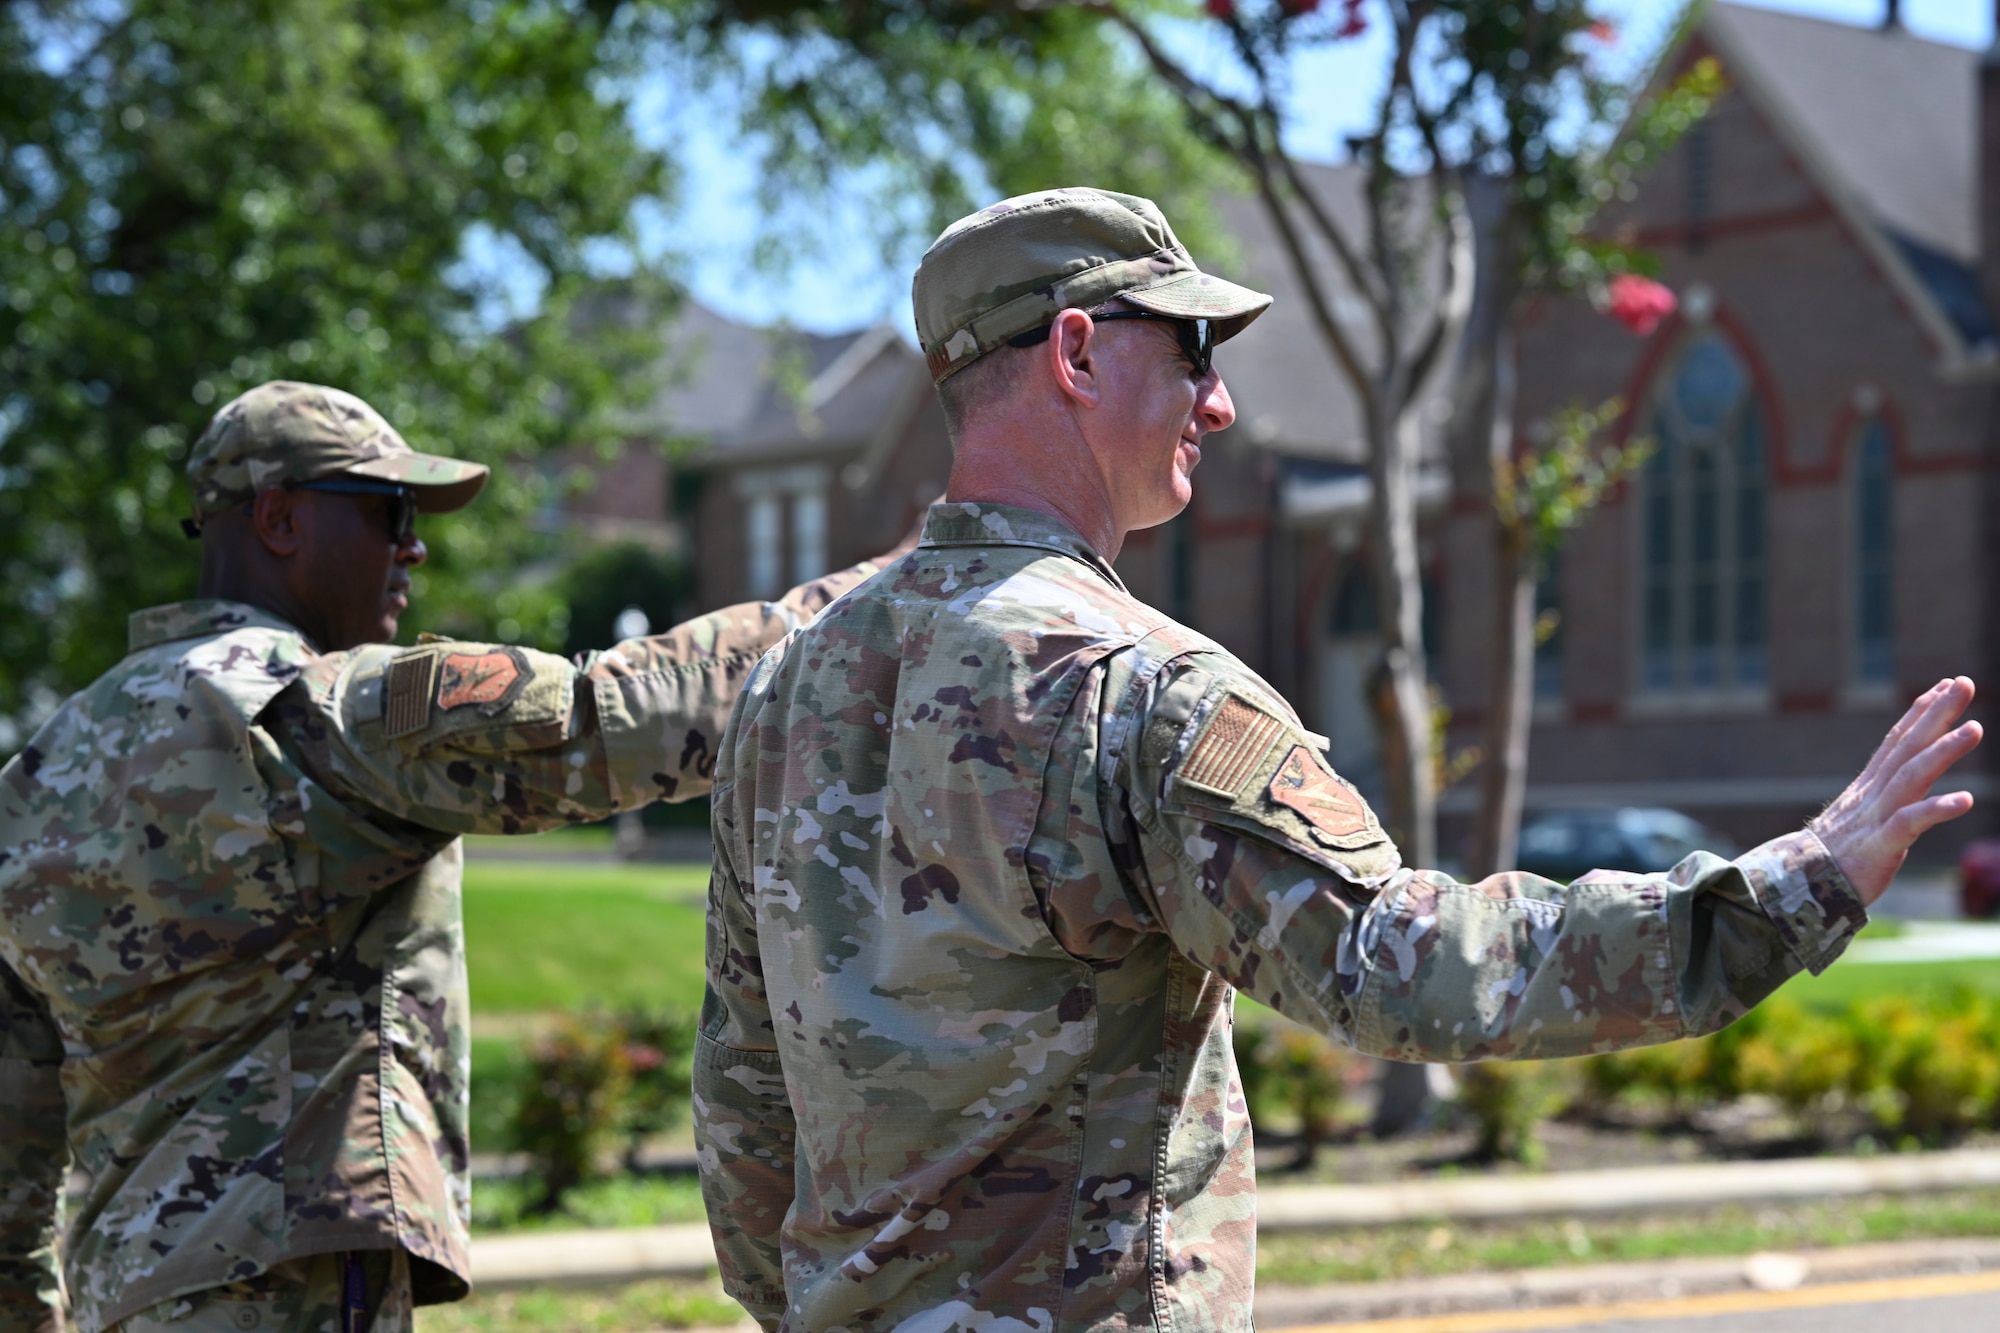 U.S. Air Force Col. Seth Graham, 14th Flying Training Wing commander and Chief Master Sgt. Antonio Cooper 14FTW command chief, wave as the pass by a crowd during the 25th Annual Juneteenth Parade, June 18, 2022, in Downtown Columbus. Juneteenth honors the memory of June 19, 1865, when Union soldiers rode into Galveston, Texas and read President Abraham Lincoln’s Emancipation Proclamation to the public. (U.S. Air Force photo by Senior Airman Jessica Haynie